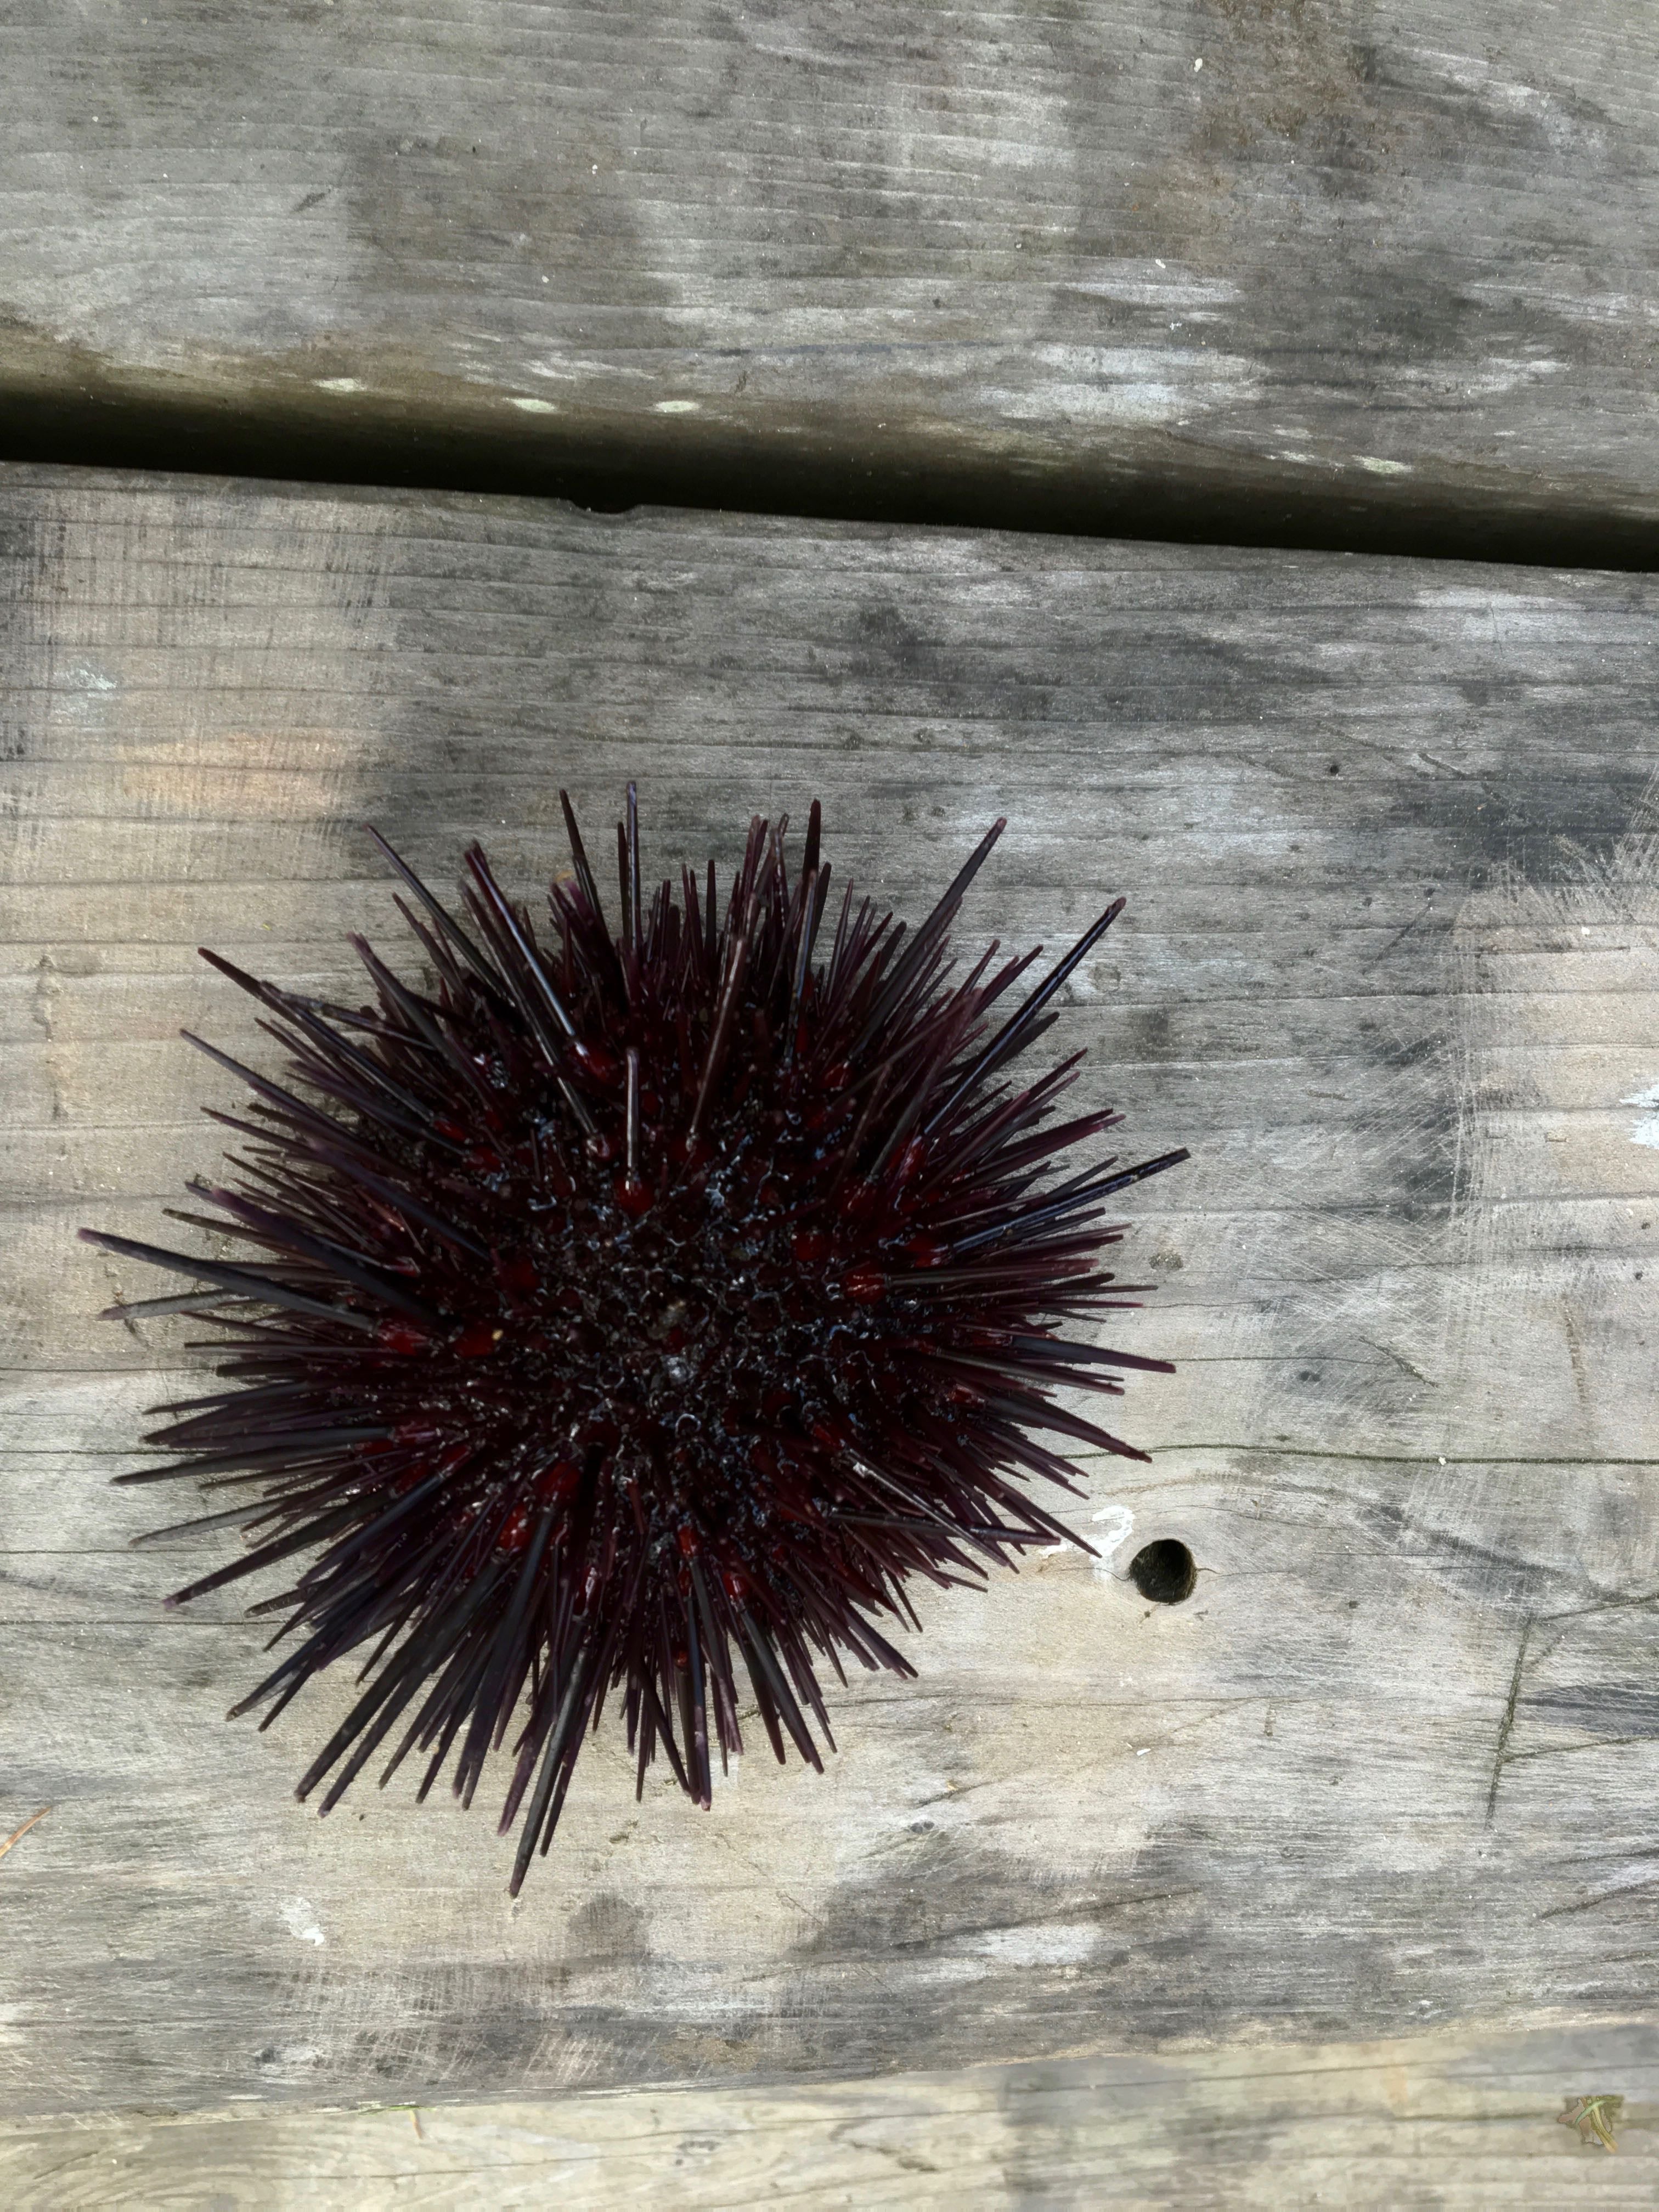 abalone fishing may be closed but there are tons of urchins (in fact they could use help culling them). Nice to process catch at the butchering station at the campground. 